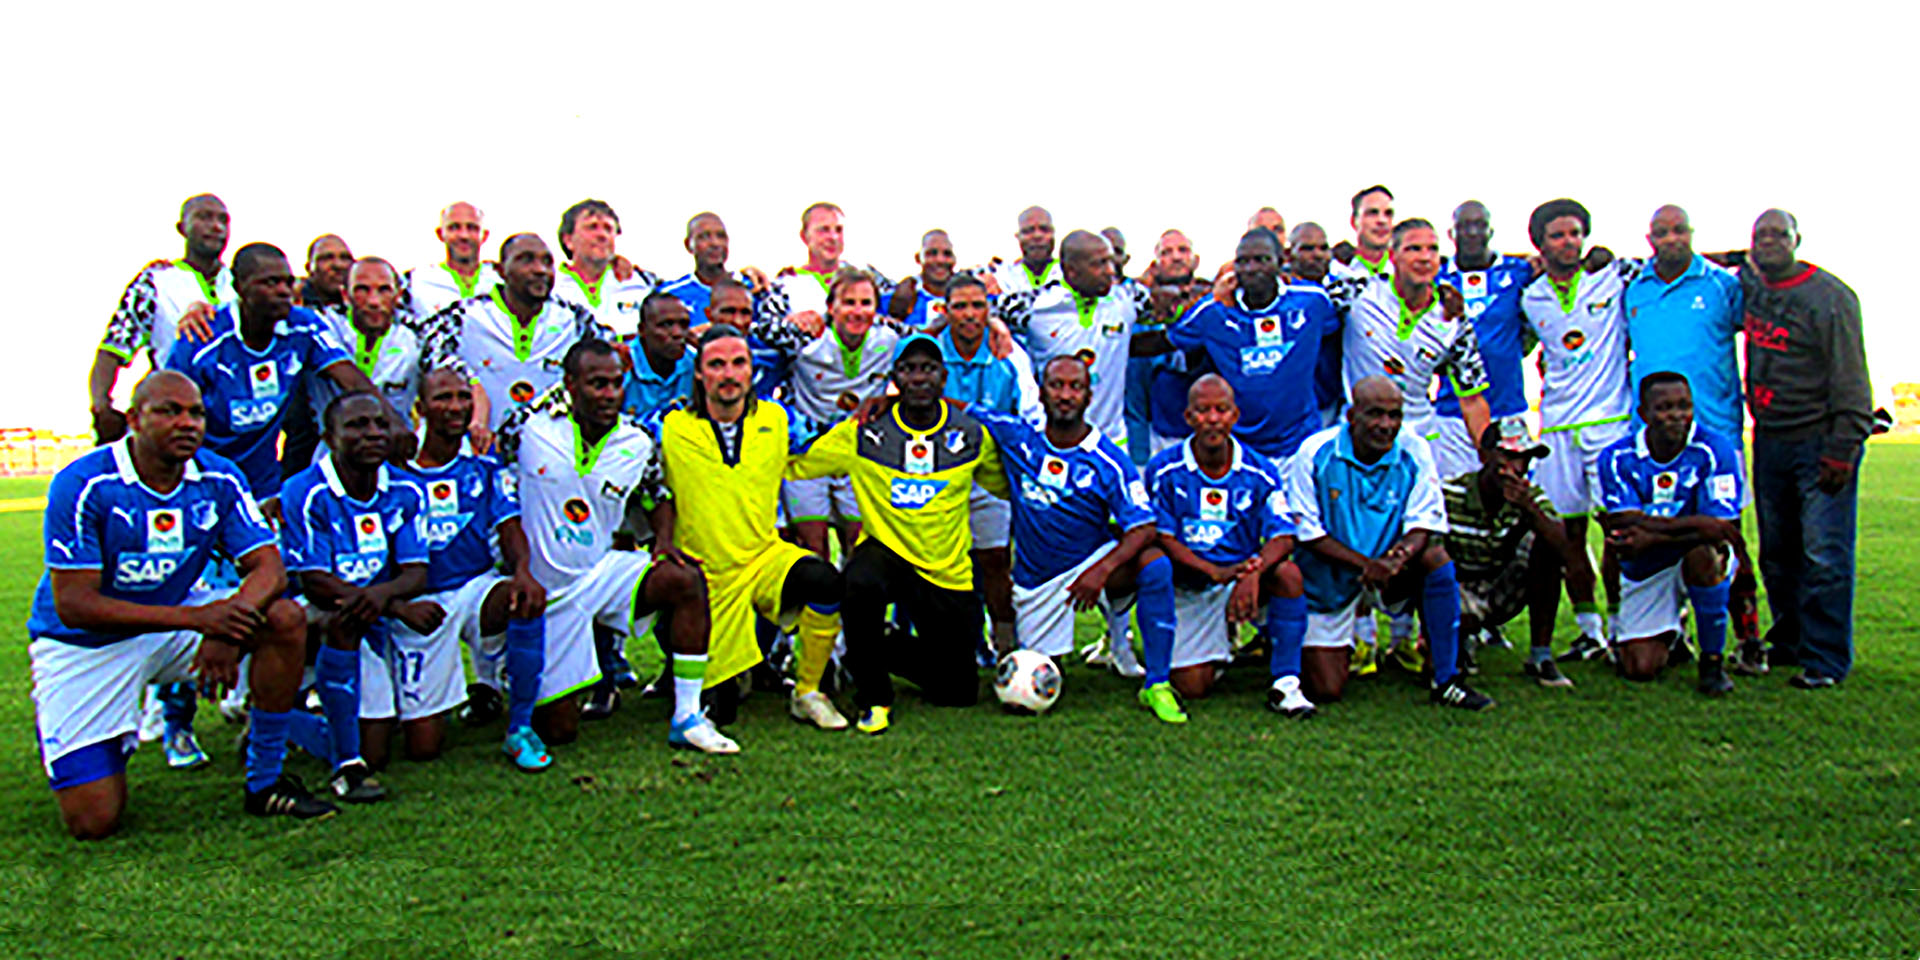 soccer players in namibia